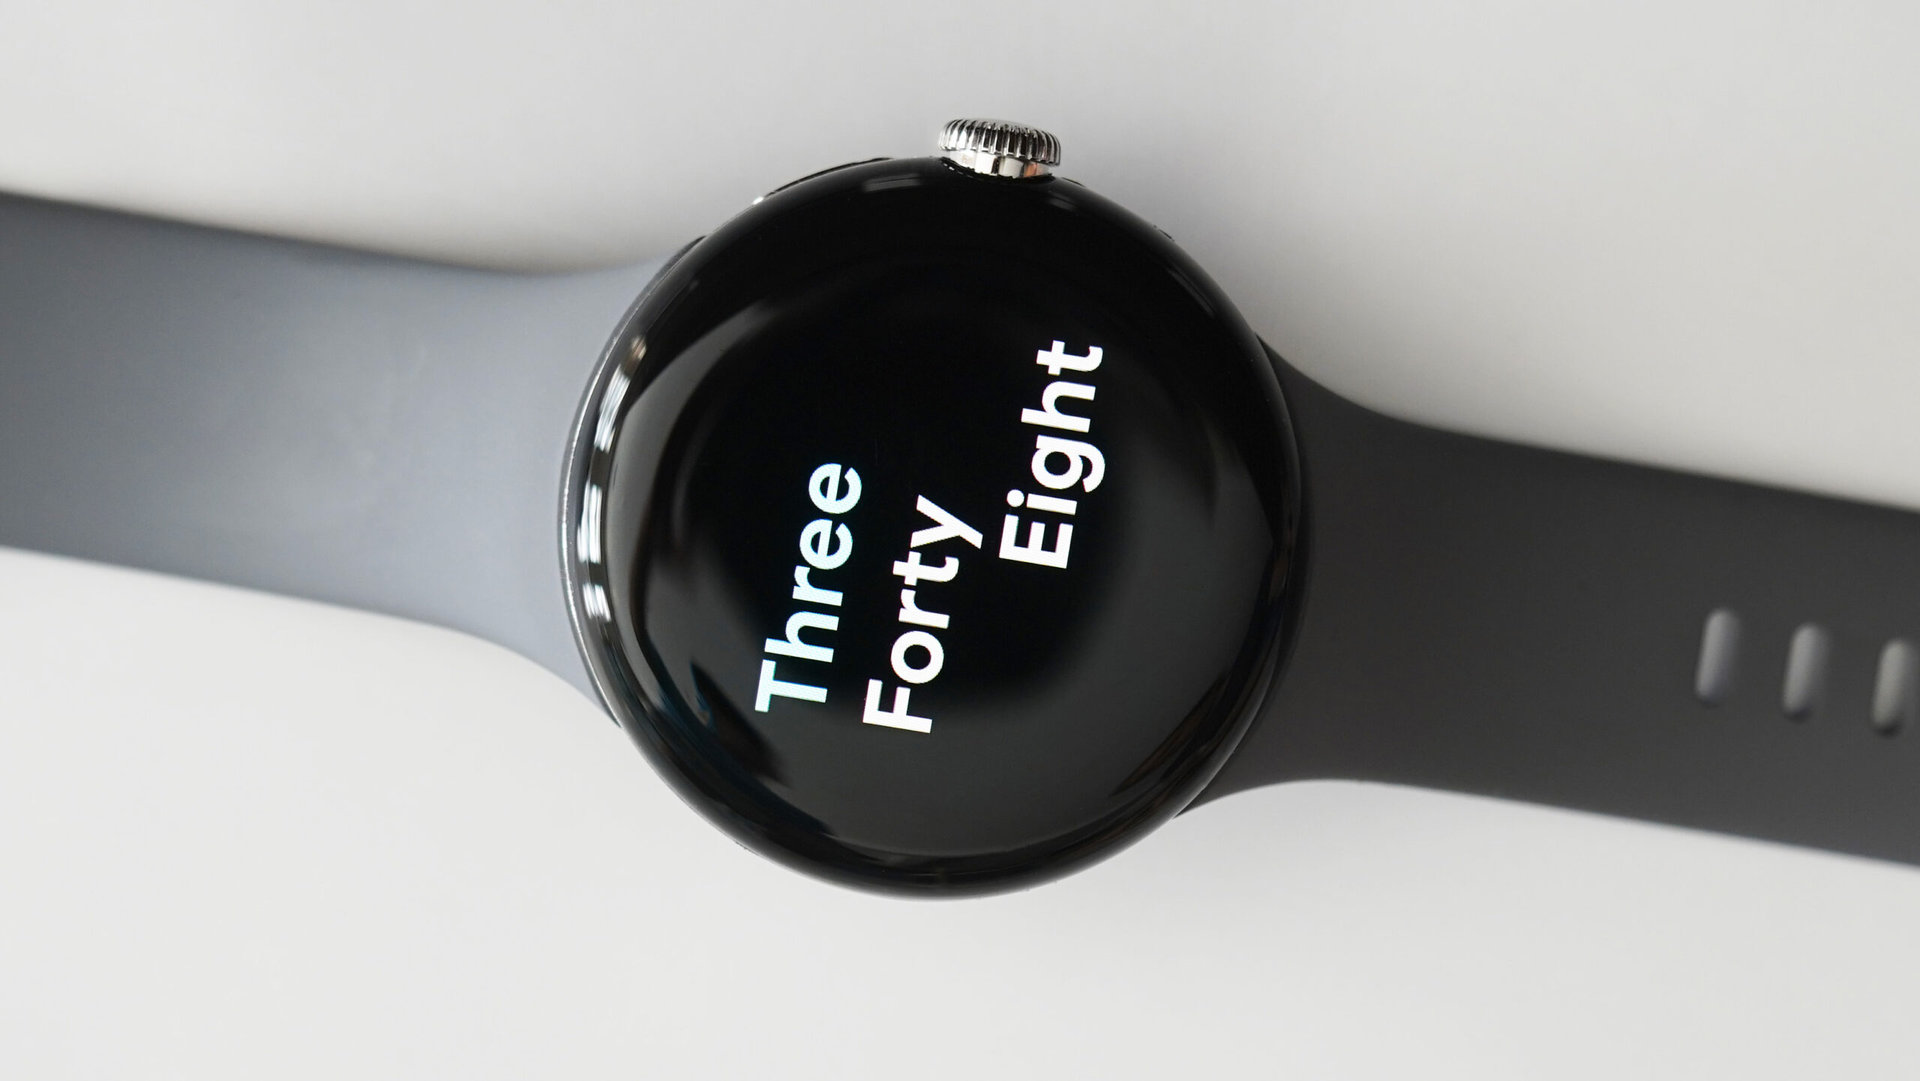 A modern font is the star of the Prime watch face.